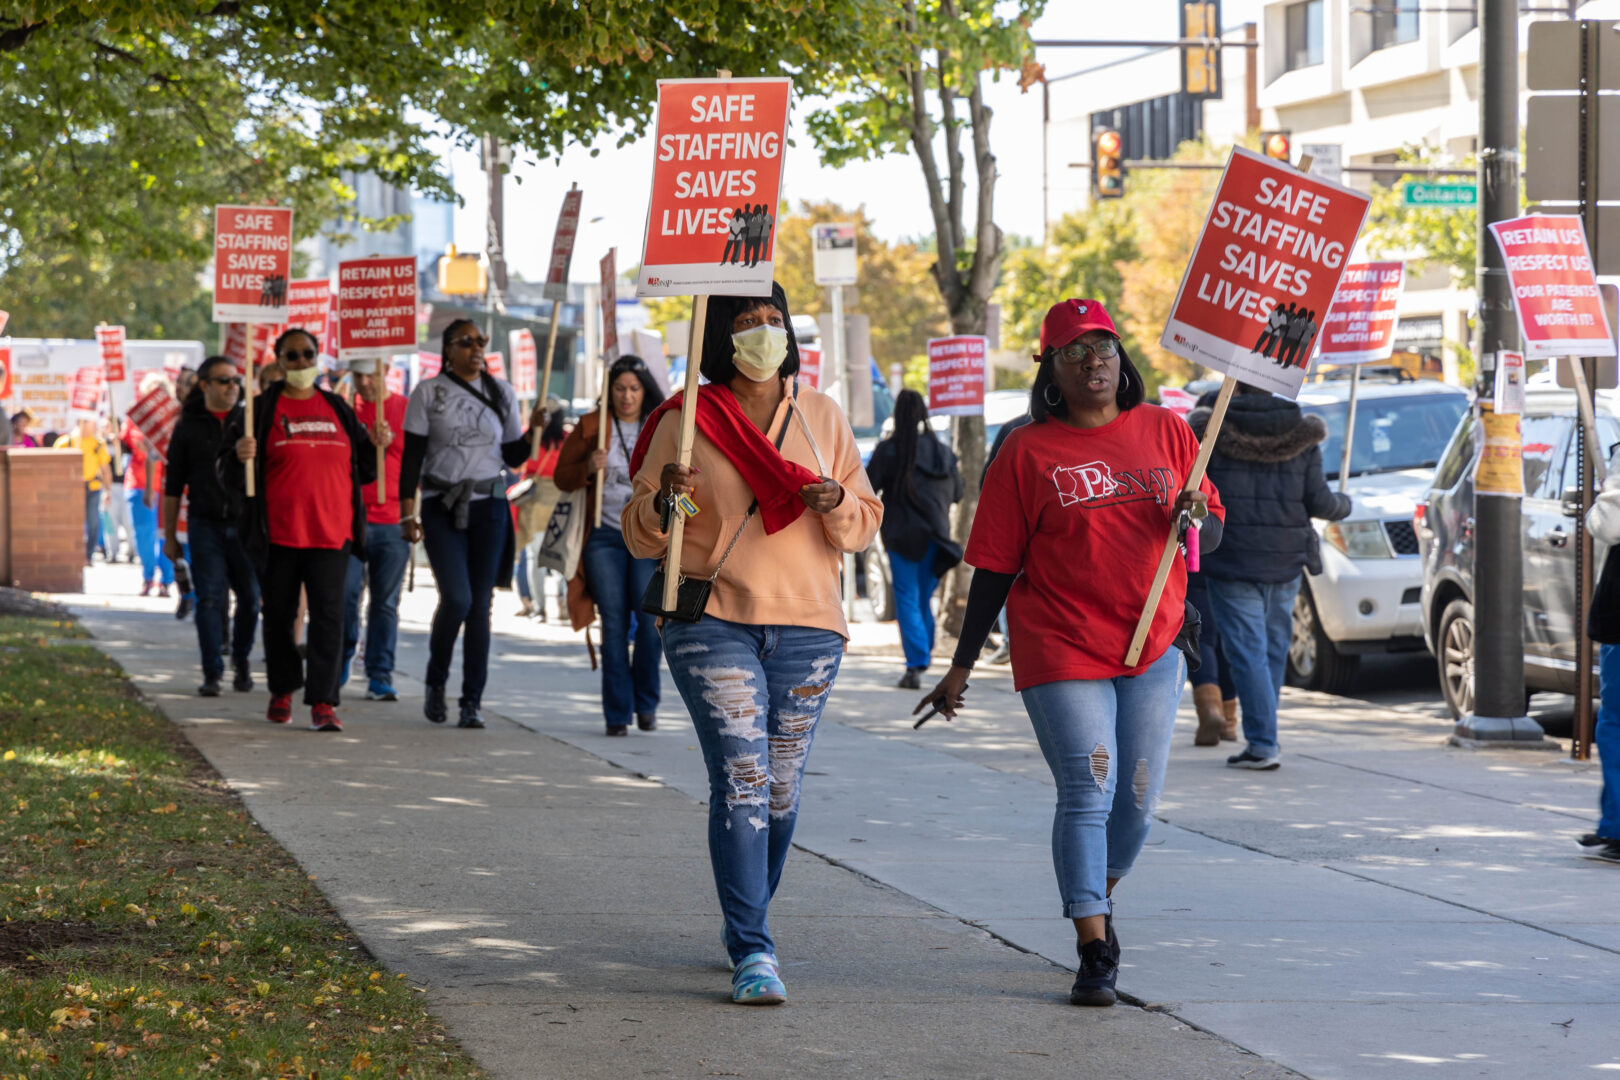 Nurses at Temple University Hospital in Philadelphia picketed on Broad Street during negotiations of a 3-year contract to raise awareness about issues of recruiting, retention and pay disparity, on September 23, 2022. 